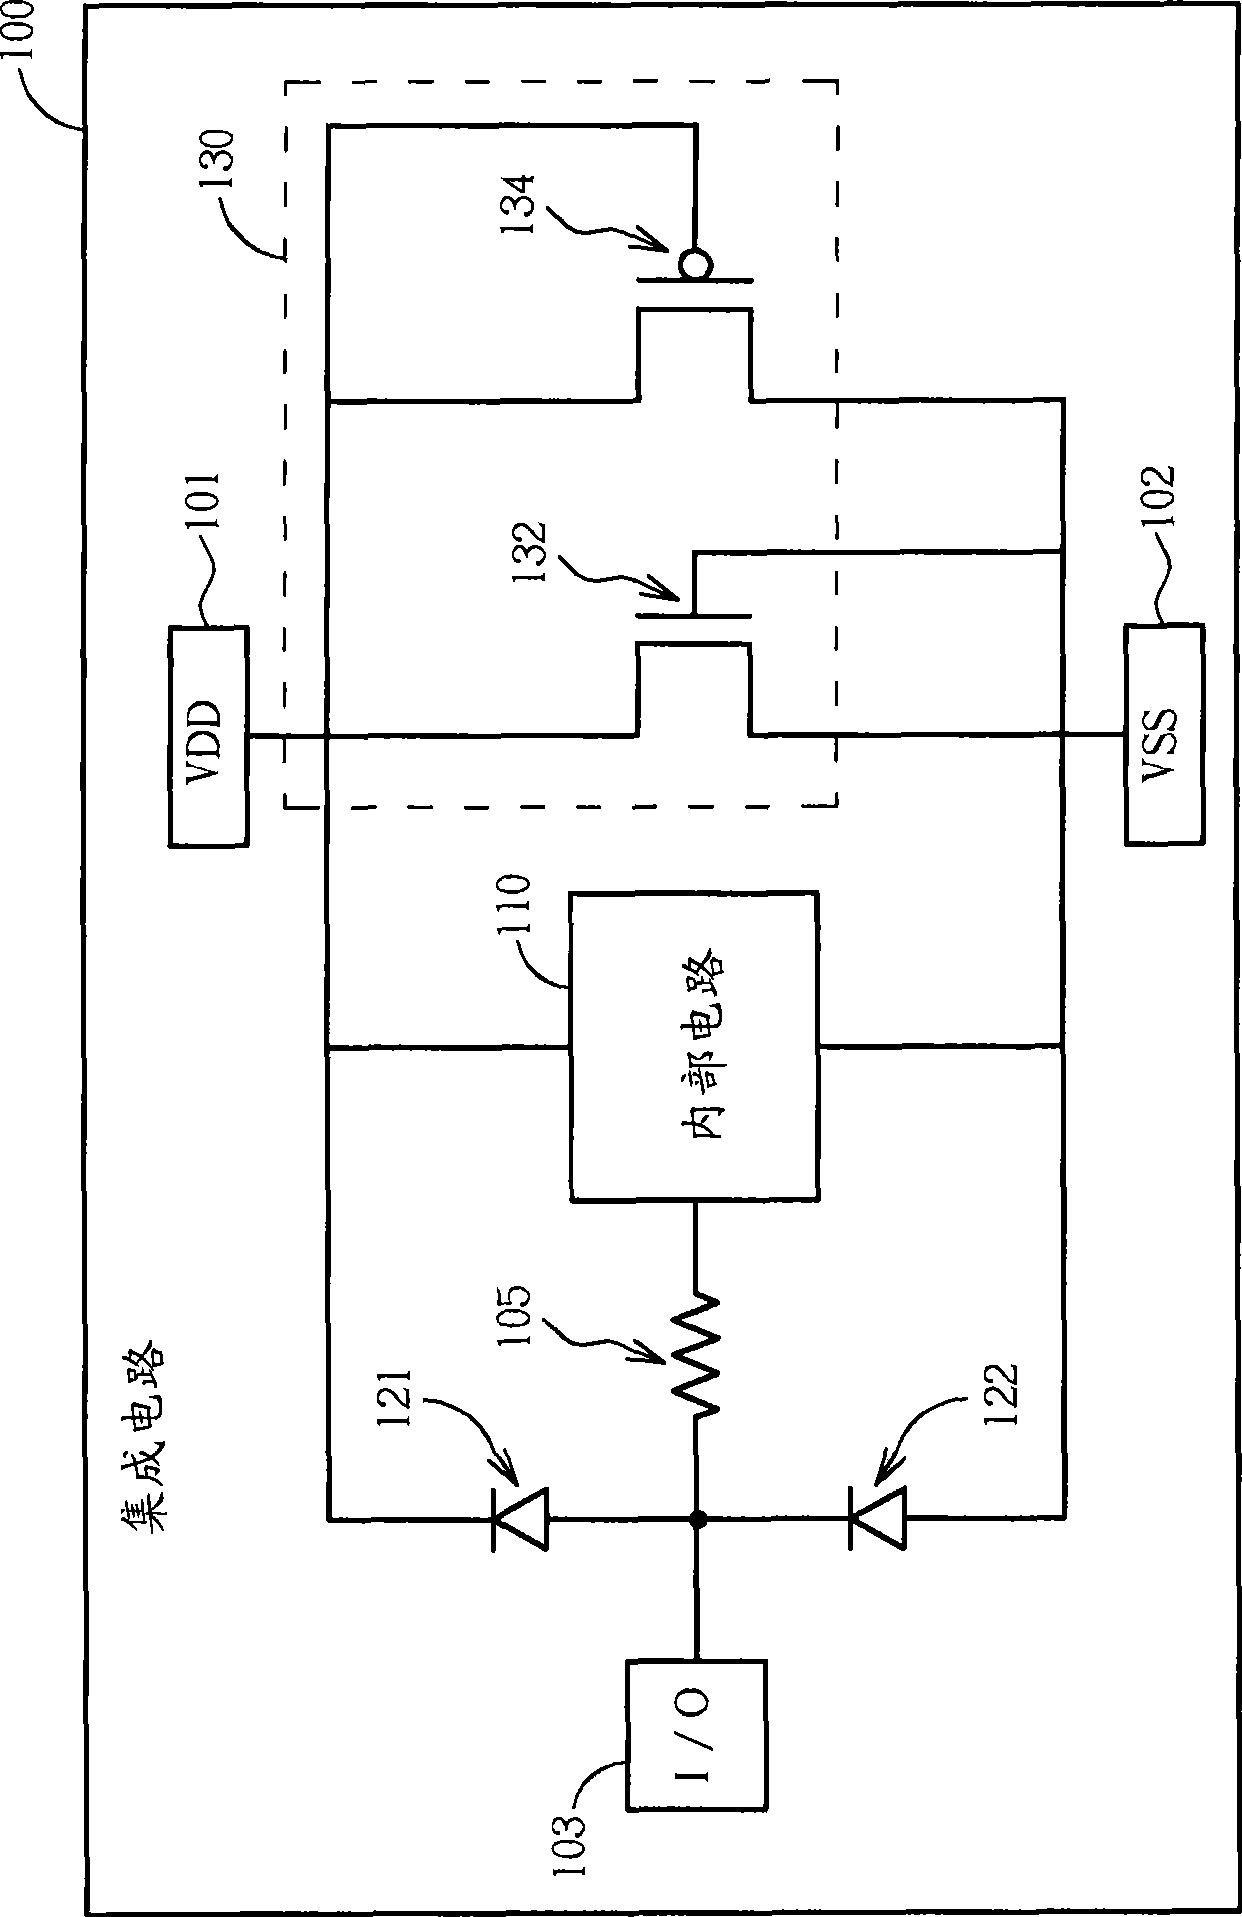 Integrated circuit with electrostatic discharge protecting circuit